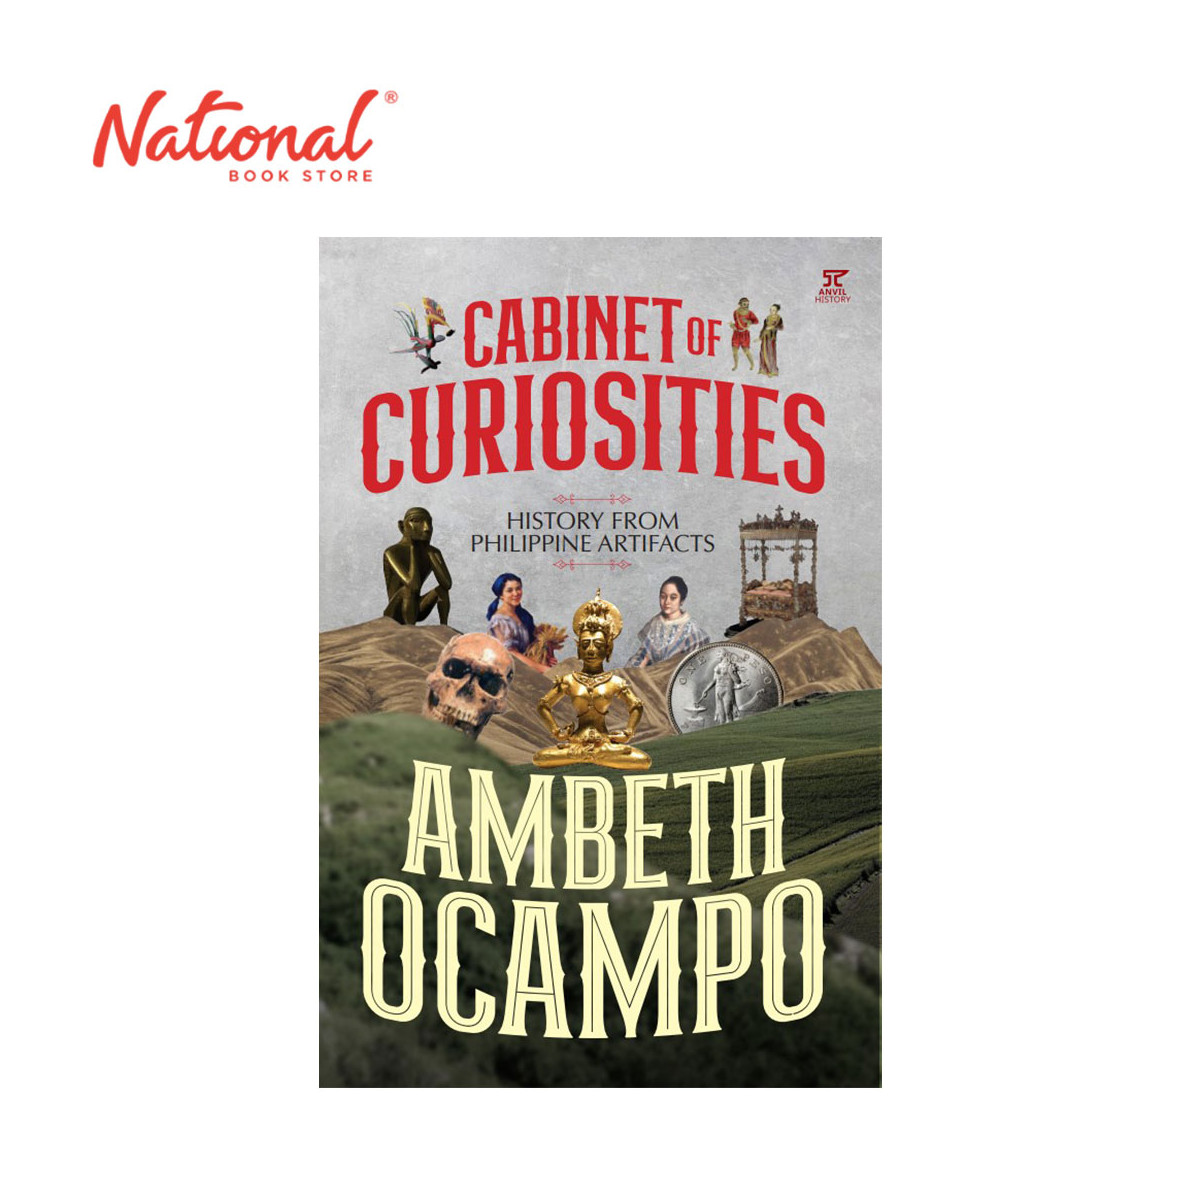 Cabinet Of Curiosities: History from Philippine Artifacts by Ambeth Ocampo - Trade Paperback